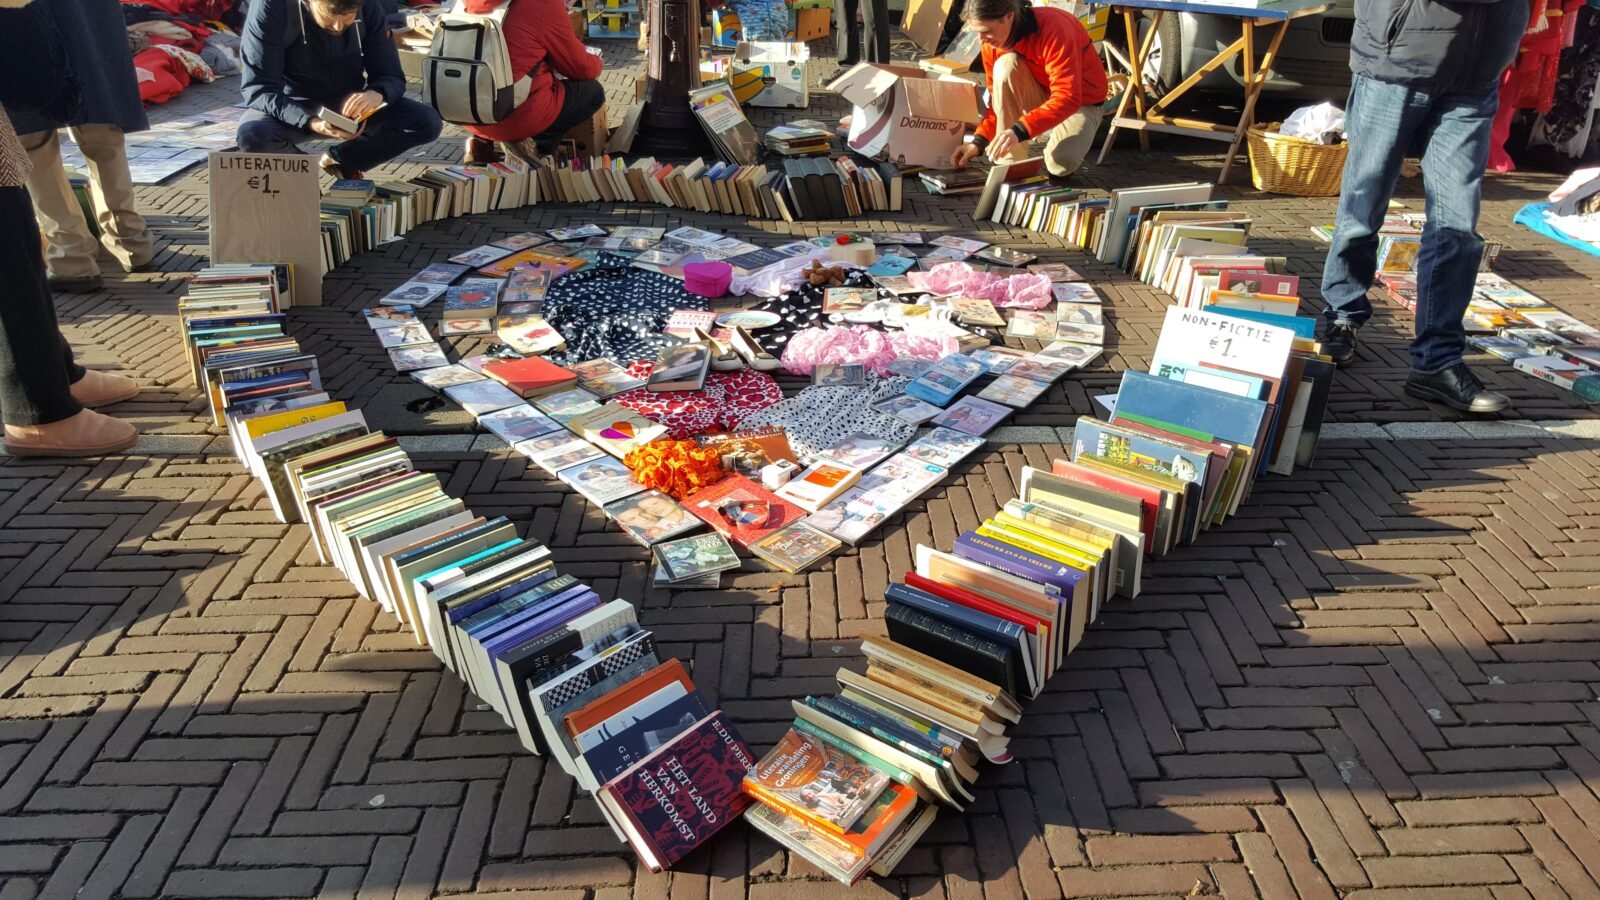 donated books have been arranged on the ground in the shape of heart as a part of an easy nonprofit fundraiser.